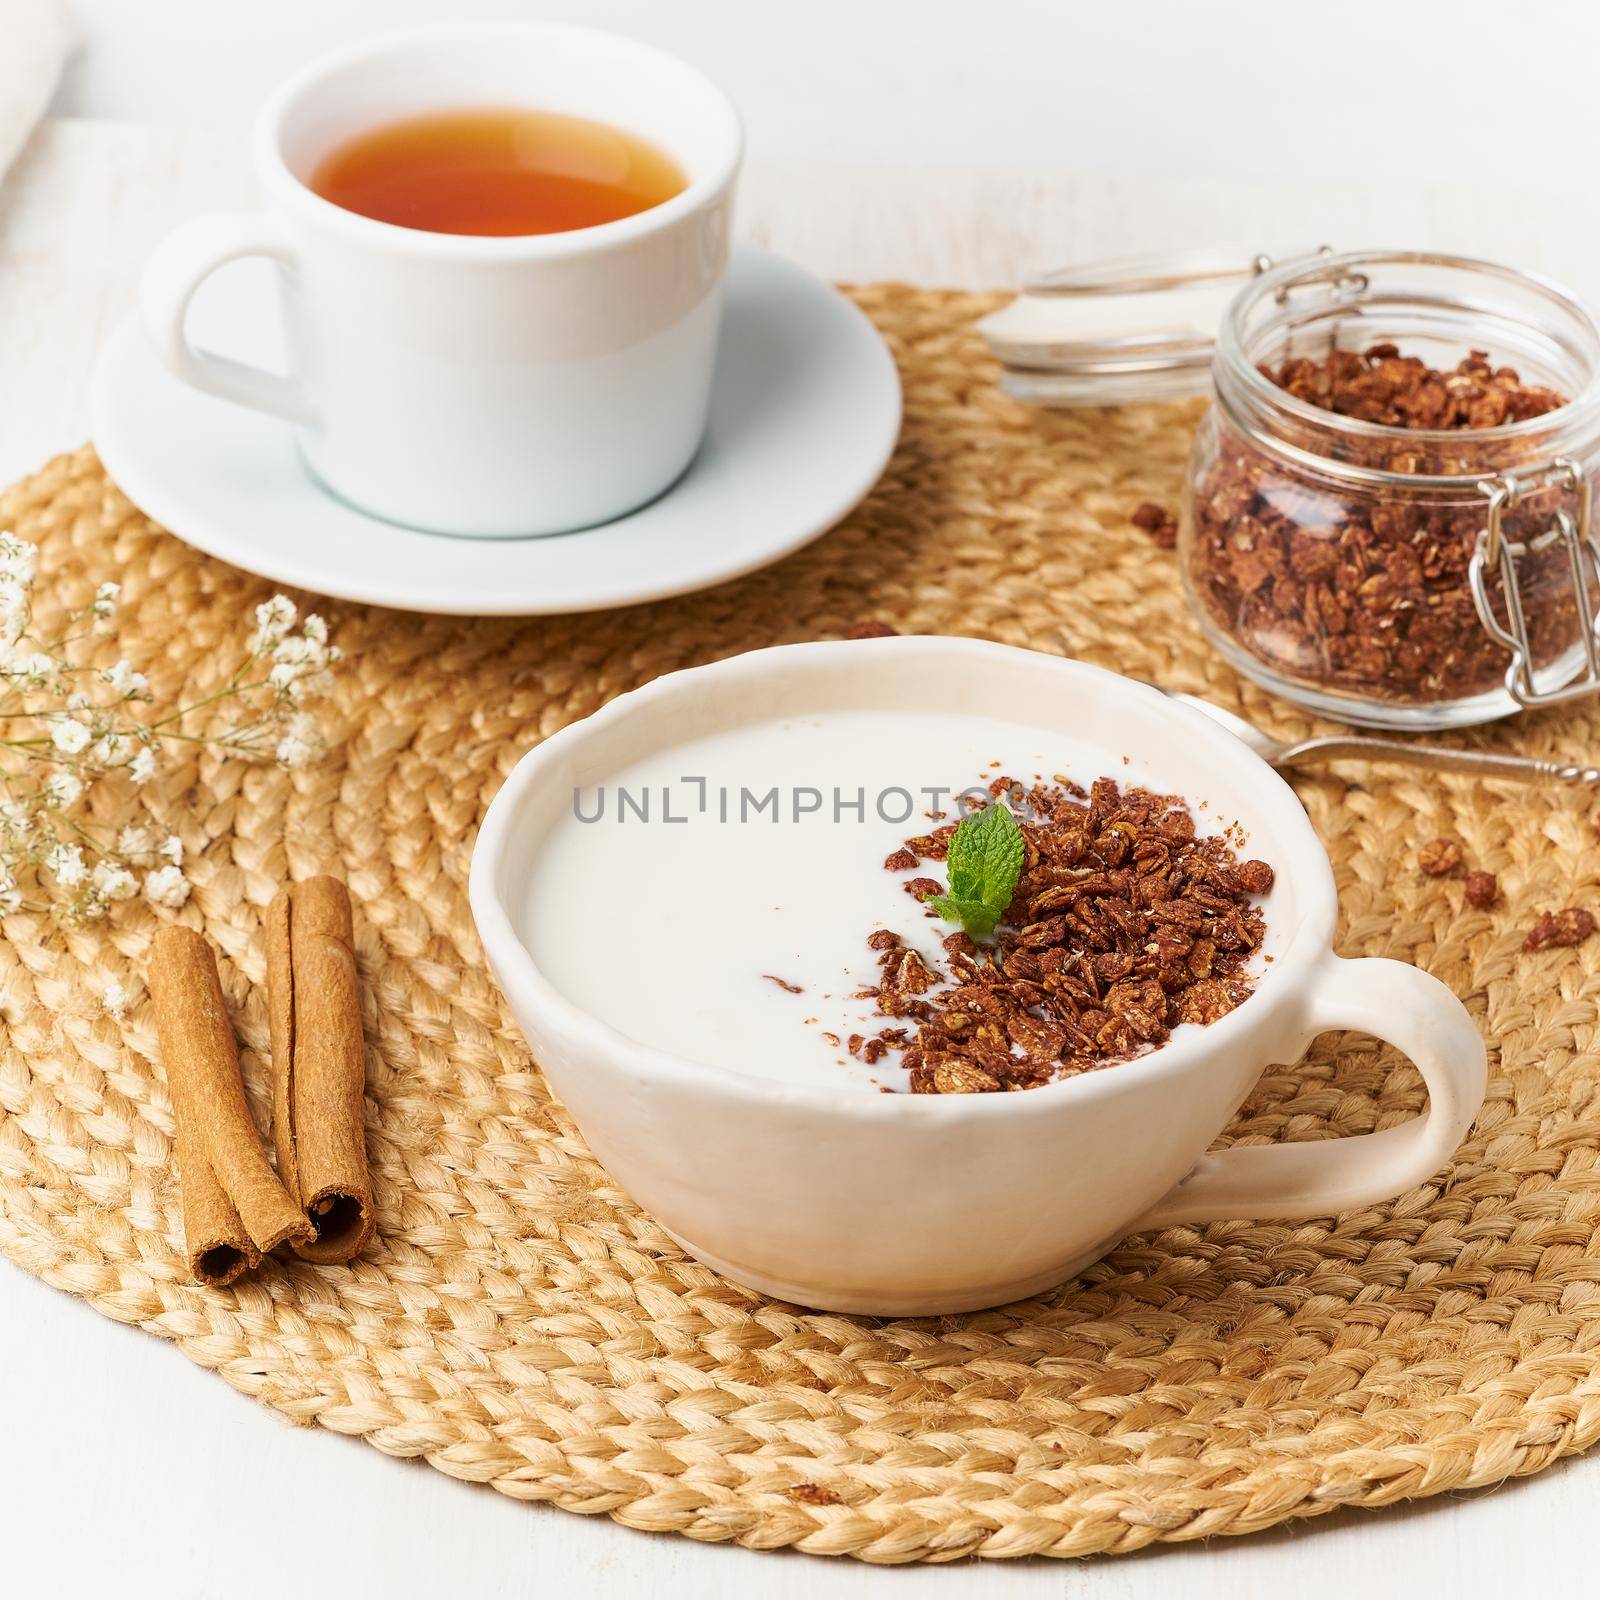 Yogurt with chocolate granola in cup, breakfast with tea on beige background, side view by NataBene